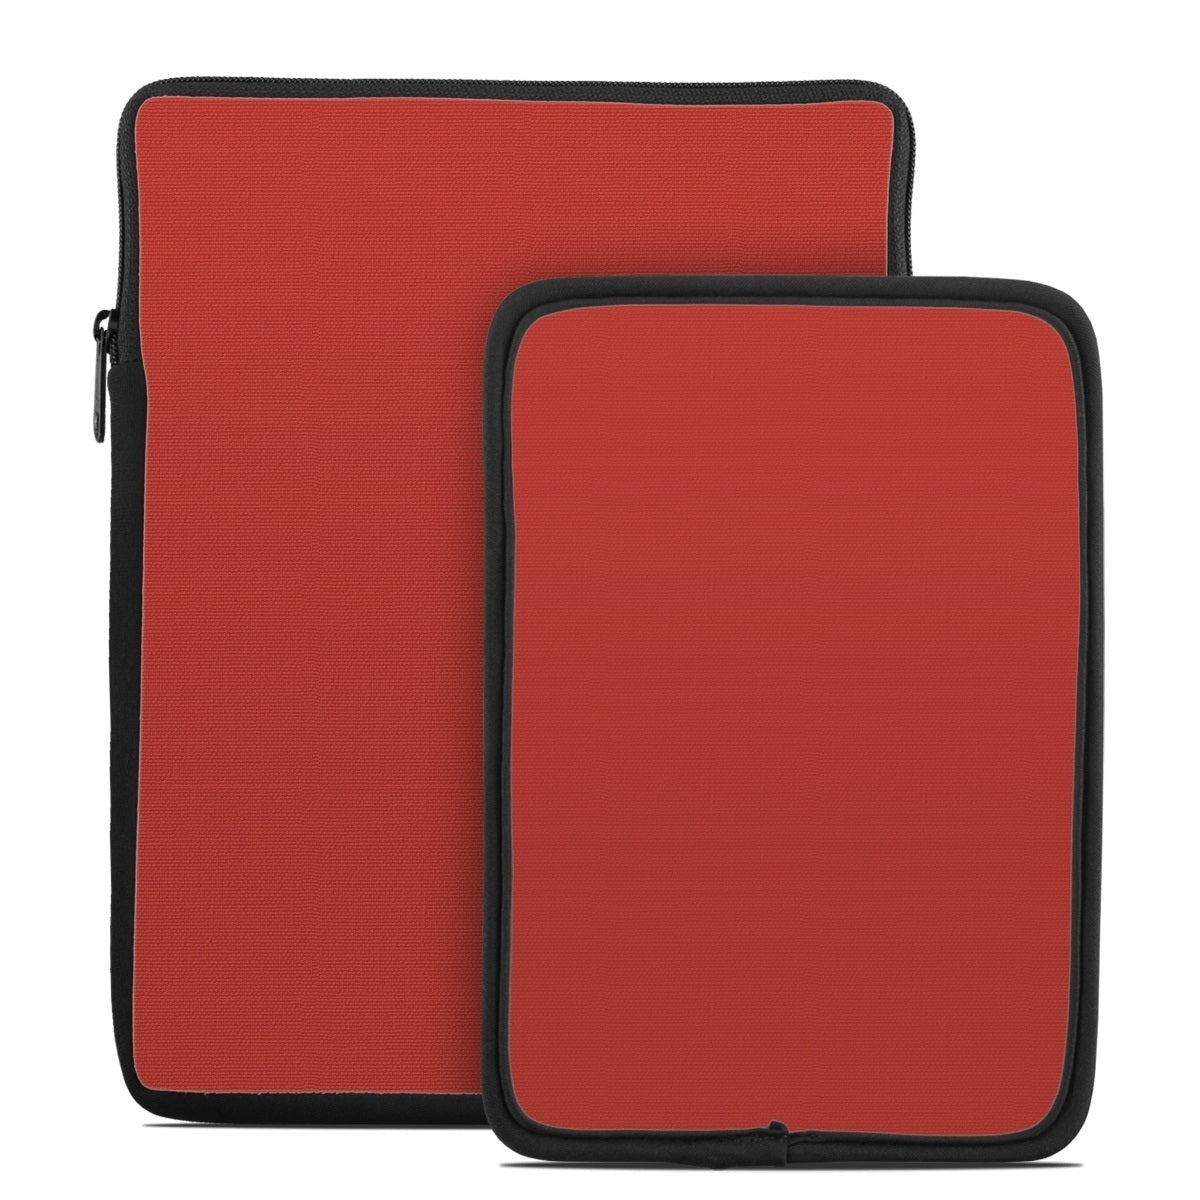 Solid State Berry - Tablet Sleeve